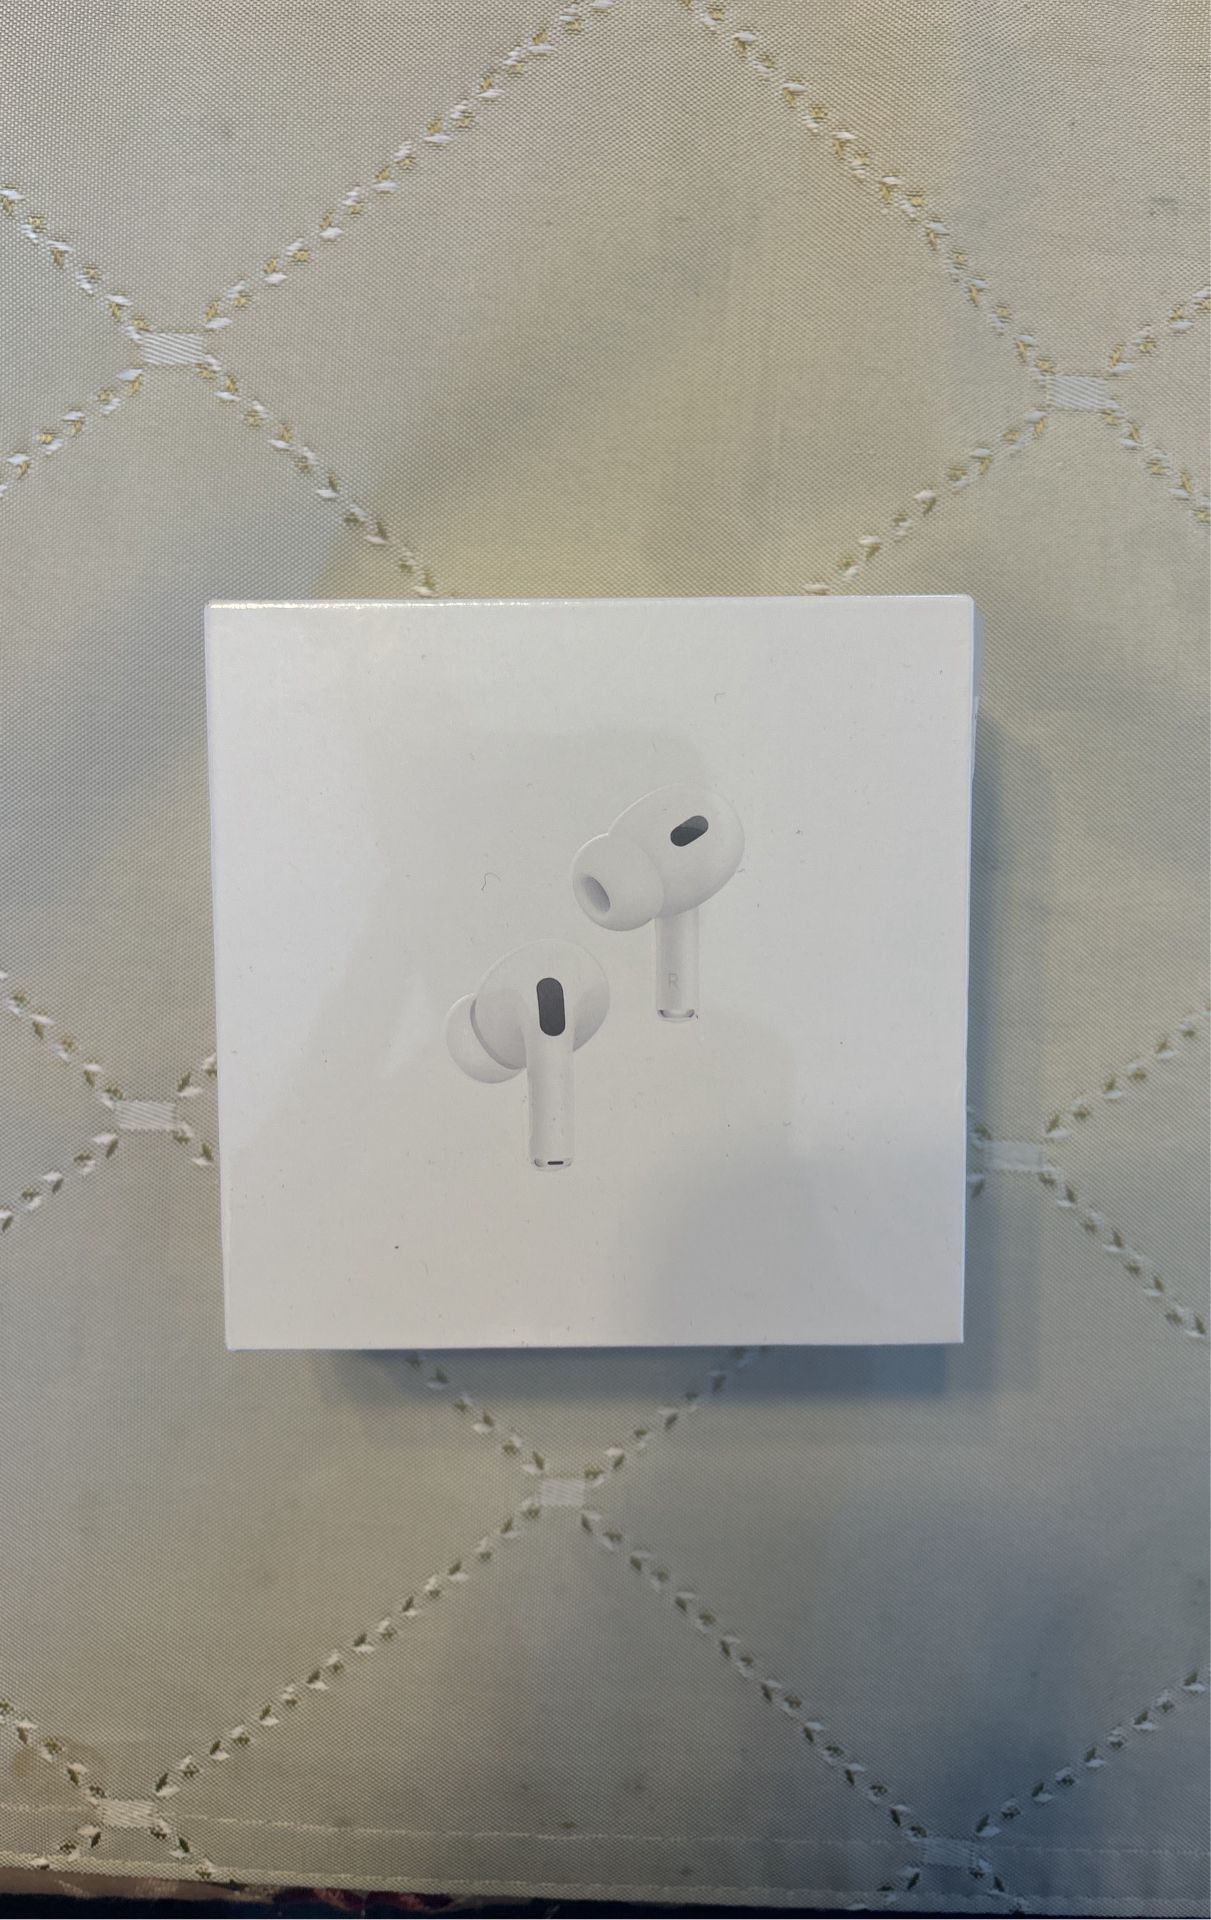 AirPods Pro 2 Sealed New